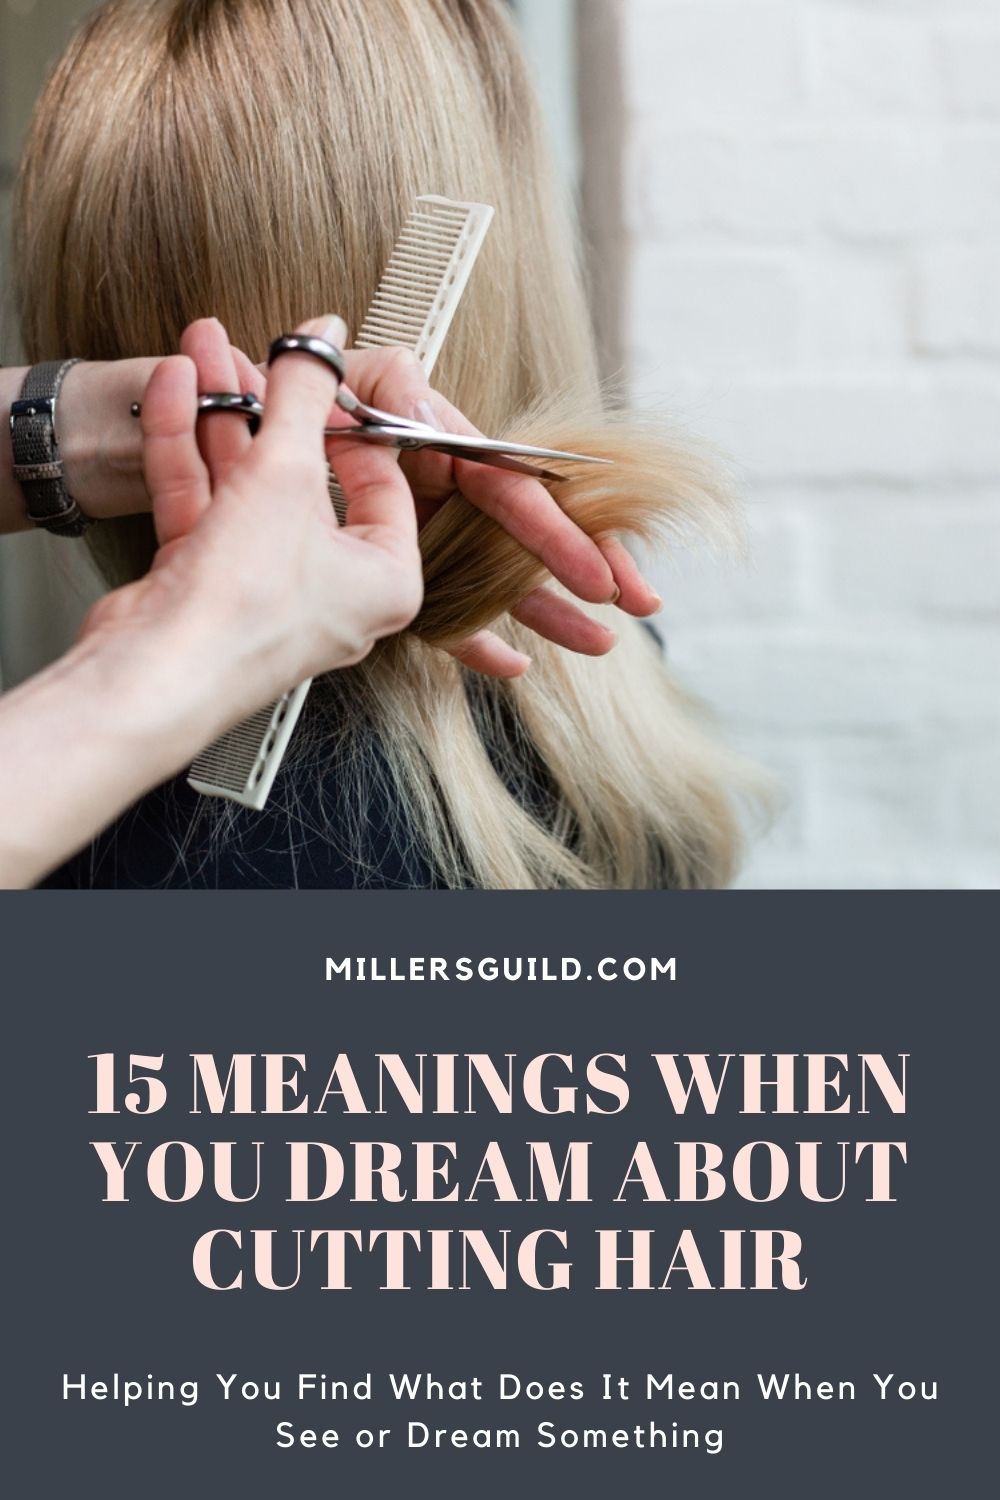 15 Meanings When You Dream About Cutting Hair